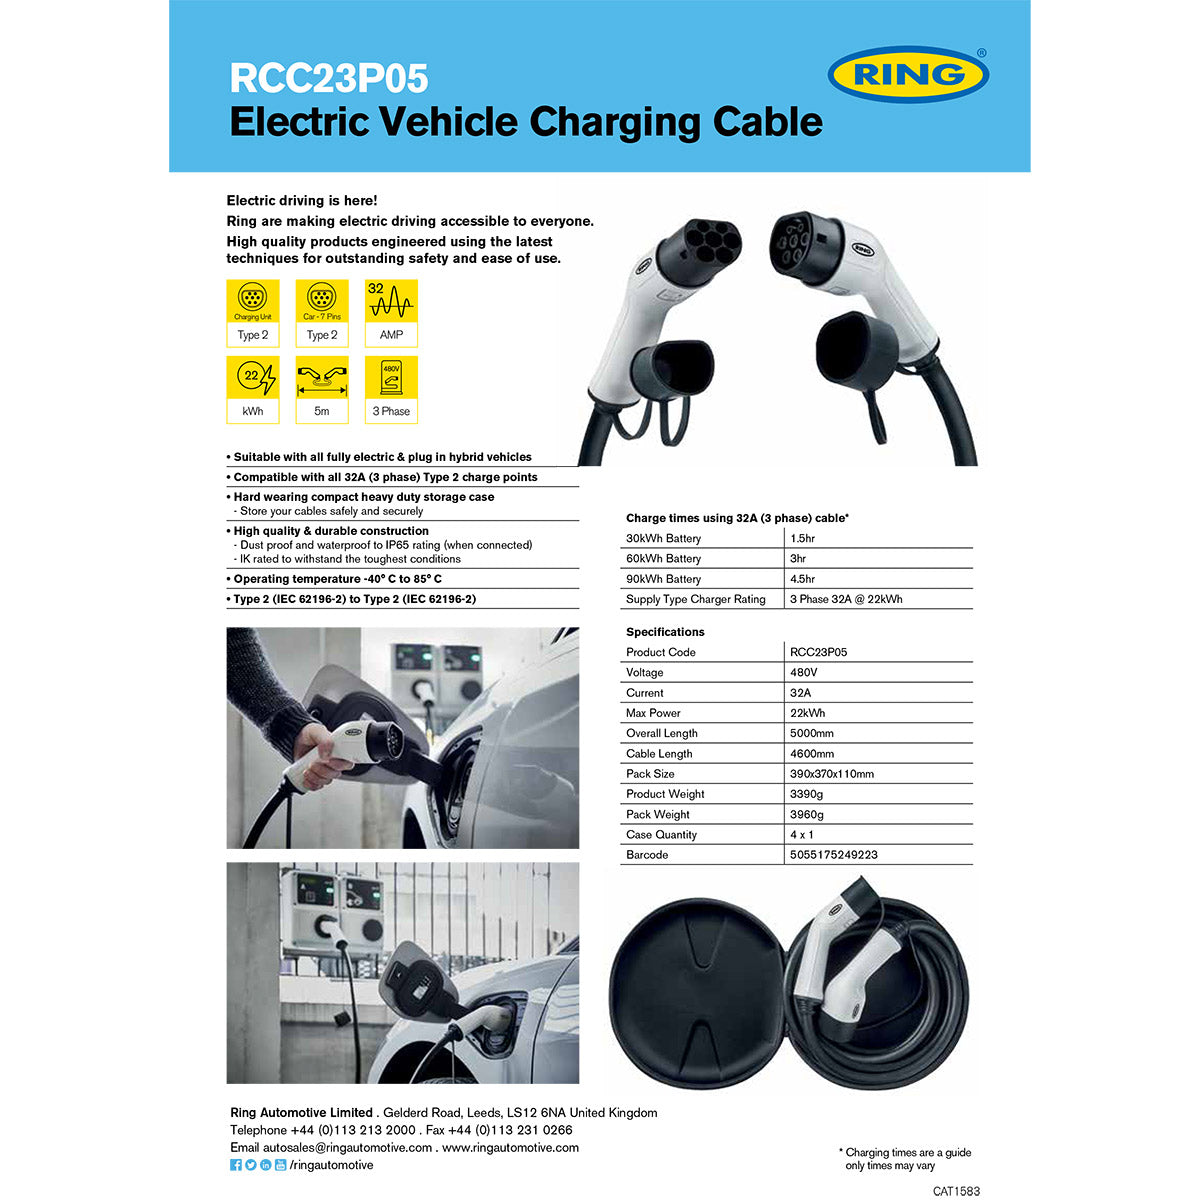 RING Electric Vehicle Charging Cable - Type 2 to Type 2 - 32A - 5 metre length